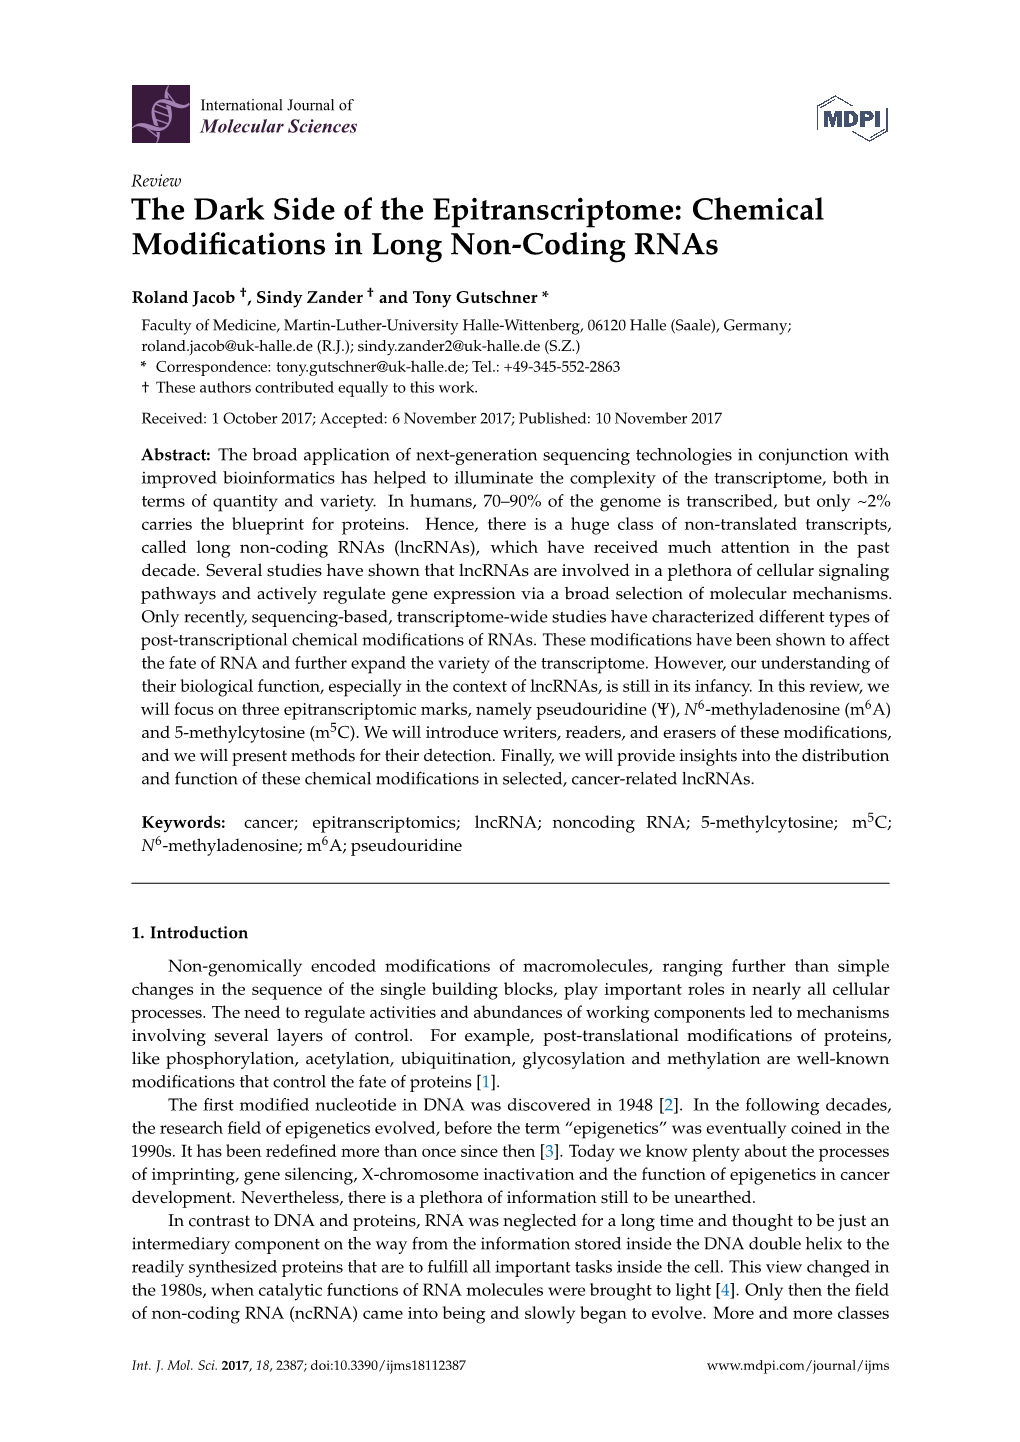 Chemical Modifications in Long Non-Coding Rnas